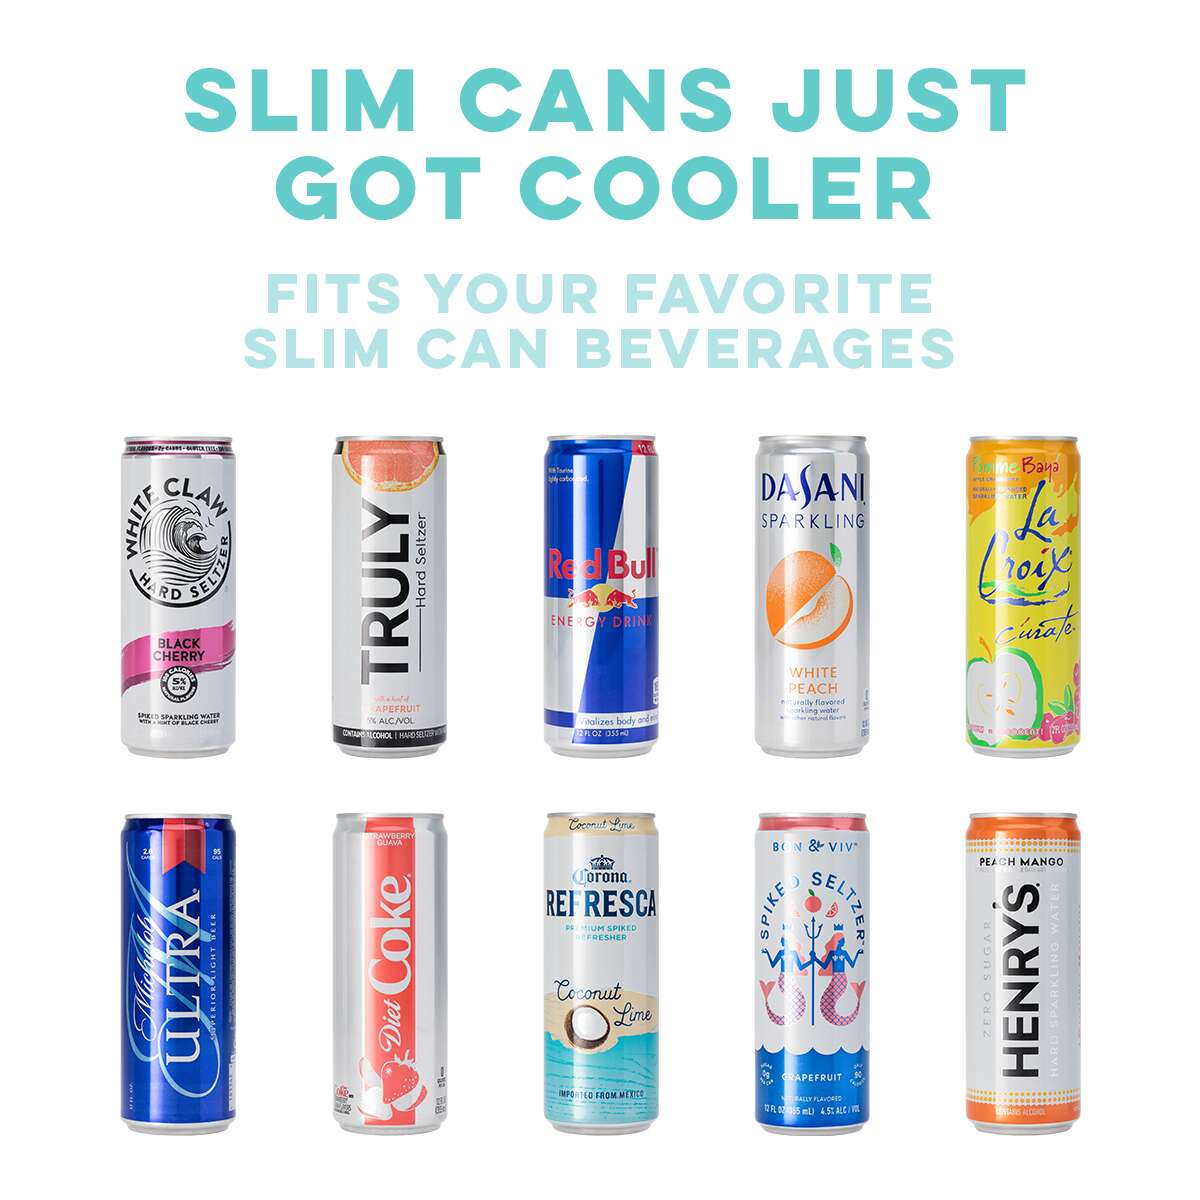 Party Animal Skinny Can Cooler